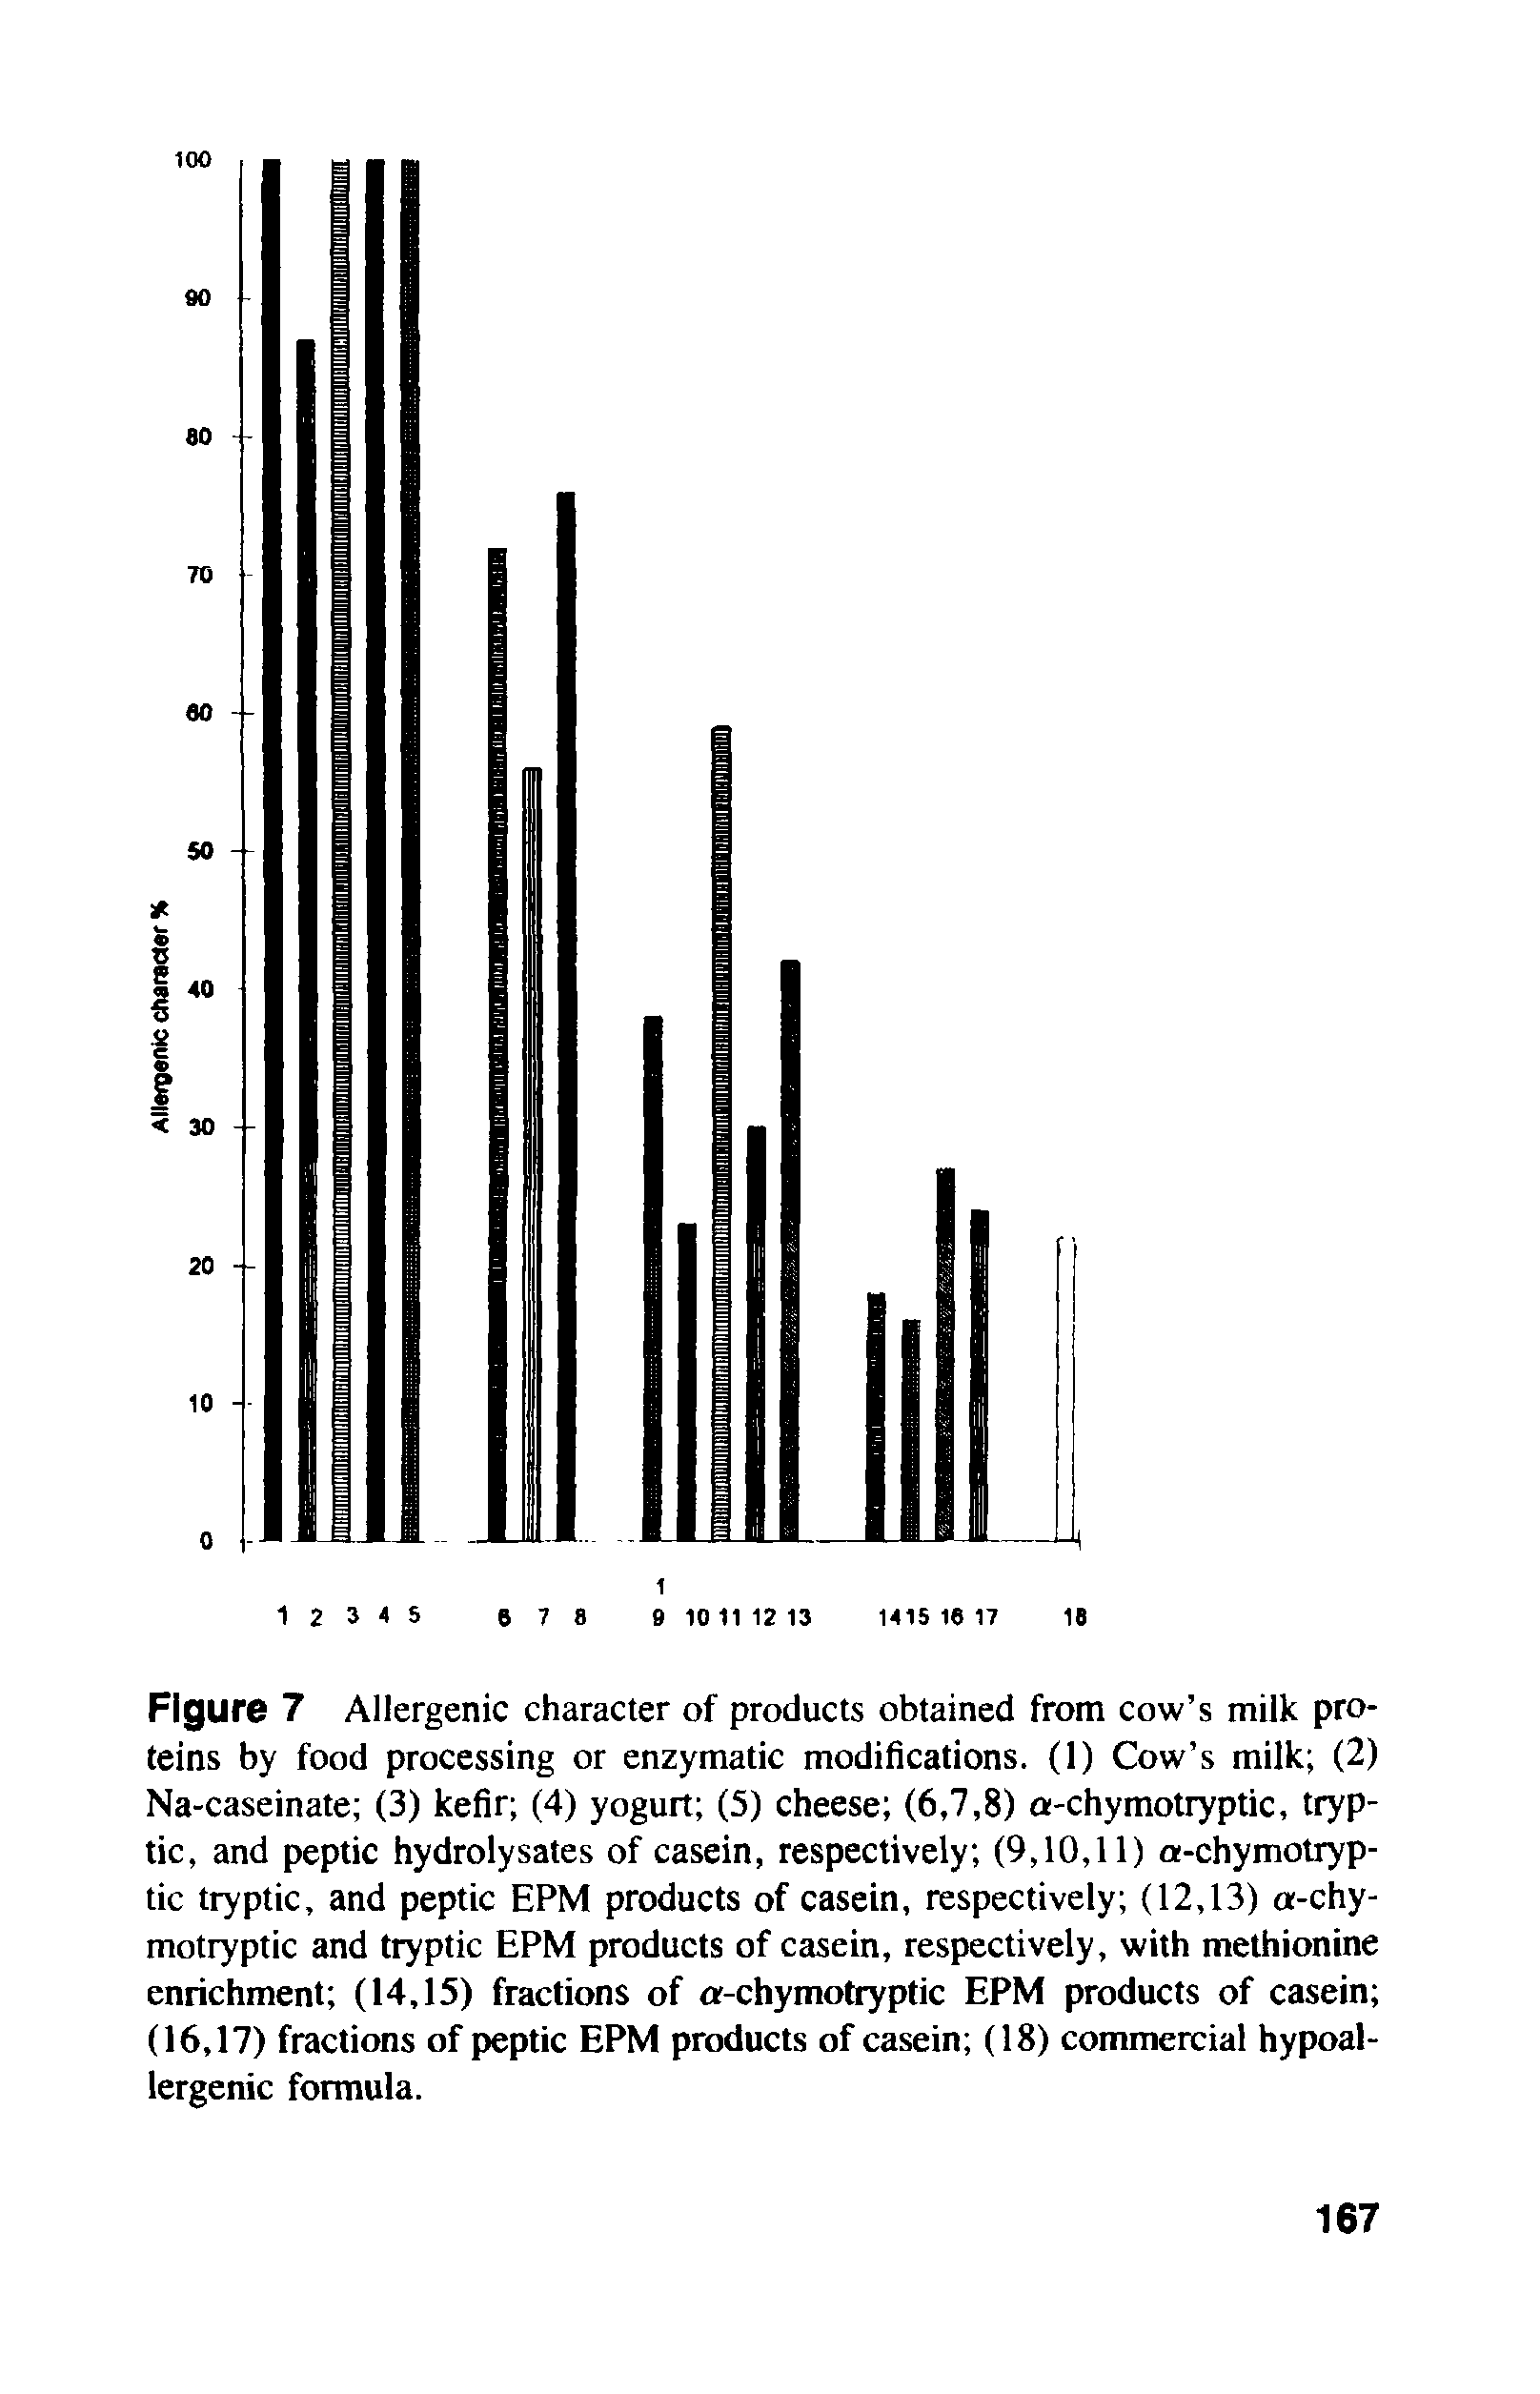 Figure 7 Allergenic character of products obtained from cow s milk proteins by food processing or enzymatic modifications. (1) Cow s milk (2) Na-caseinate (3) kefir (4) yogurt (5) cheese (6,7,8) a-chymotryptic, tryptic, and peptic hydrolysates of casein, respectively (9,10,11) a-chymotryptic tryptic, and peptic EPM products of casein, respectively (12,13) a-chymotryptic and tryptic EPM products of casein, respectively, with methionine enrichment (14,15) fractions of a-chymotryptic EPM products of casein (16,17) fractions of peptic EPM products of casein (18) commercial hypoallergenic formula.